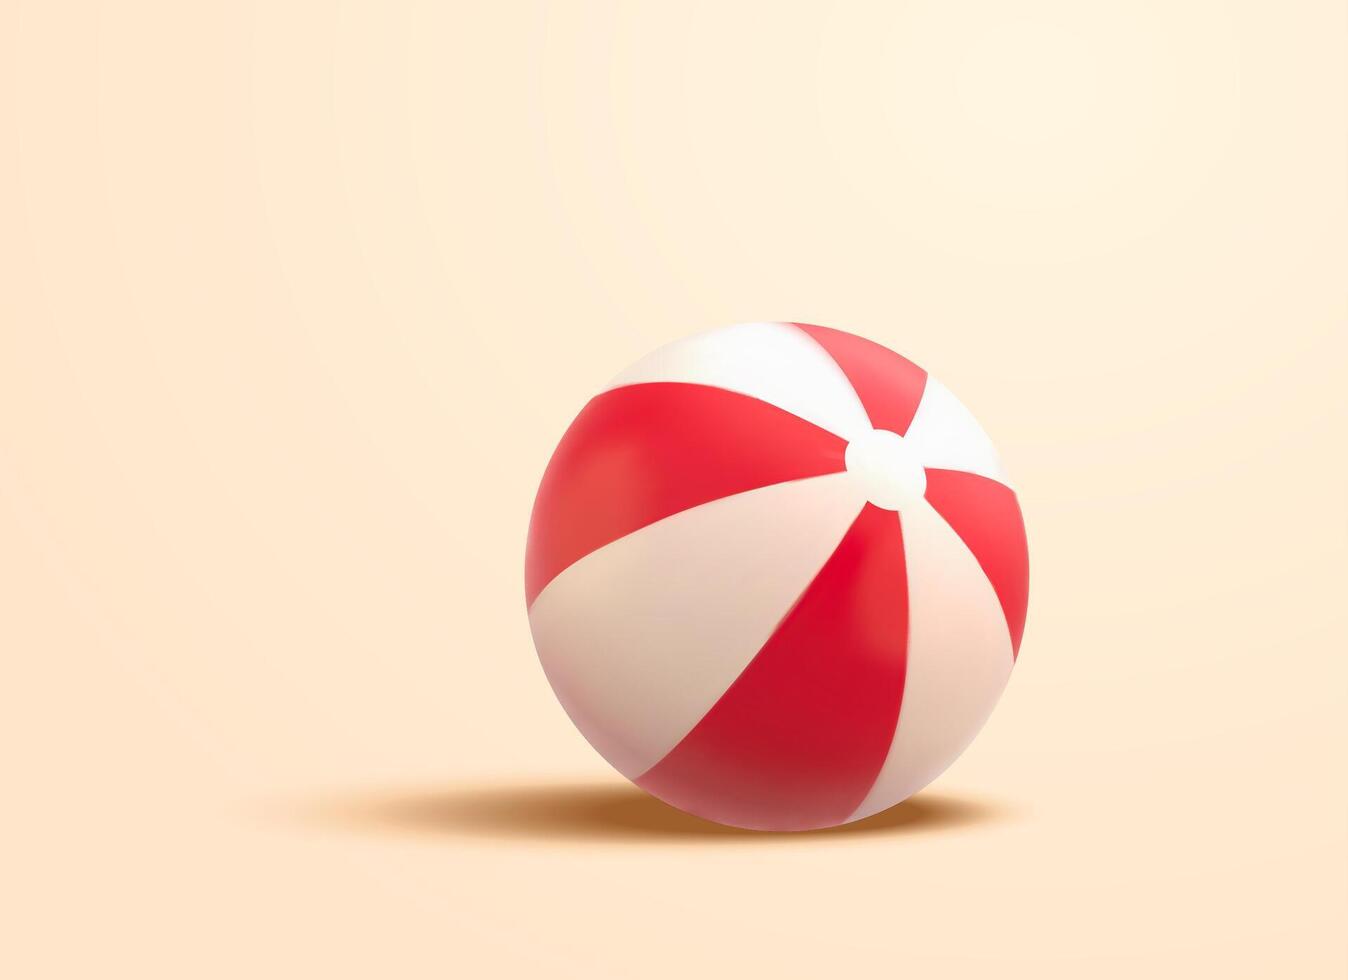 3d red and white beach ball. Illustration of an inflatable summer toy for vacation, sports, or pool party vector